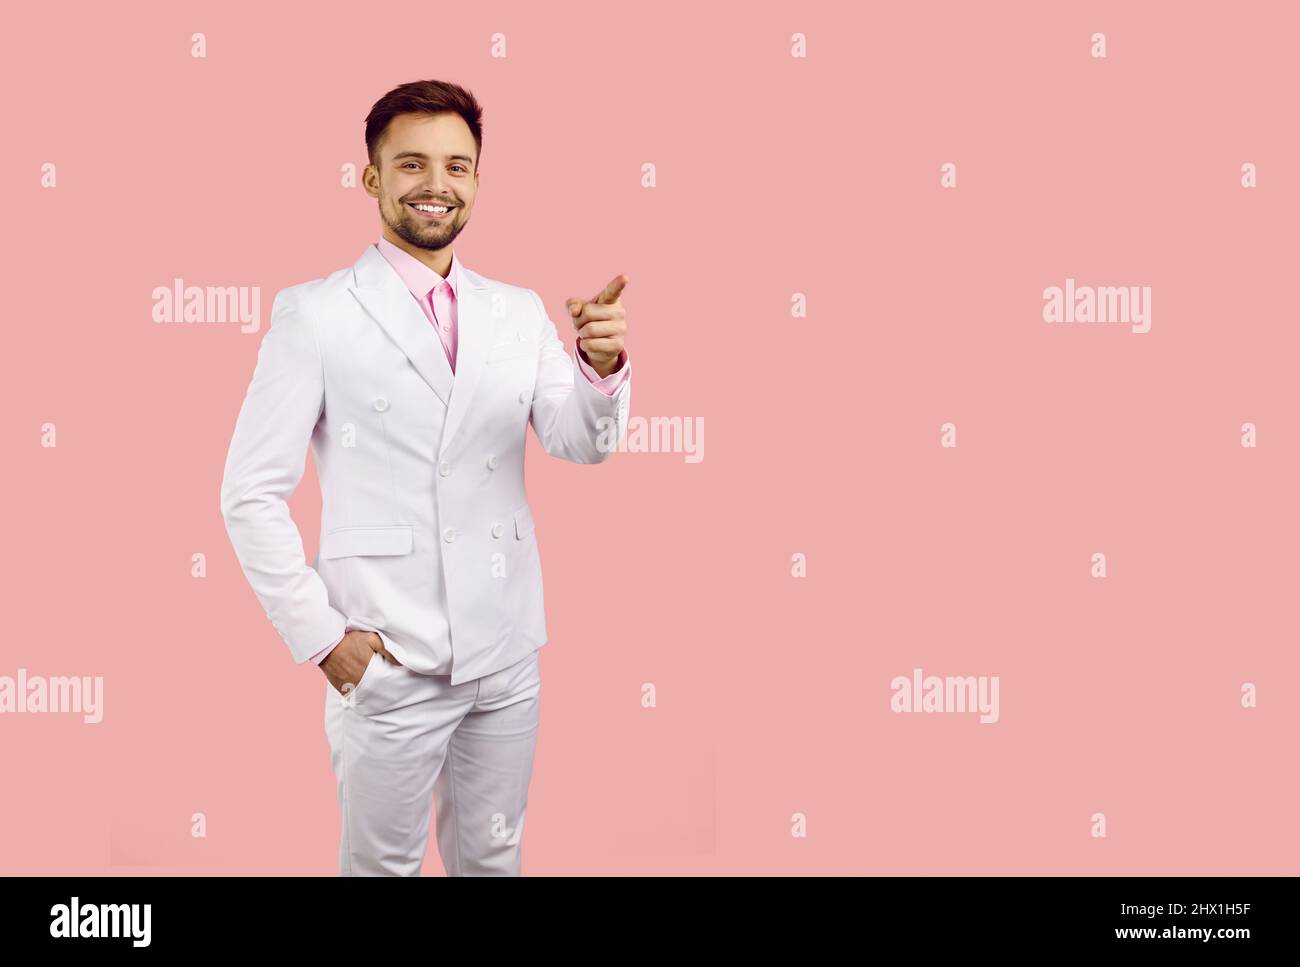 Smiling man in white suit looks at you and points his index finger at copy space on pink background. Stock Photo